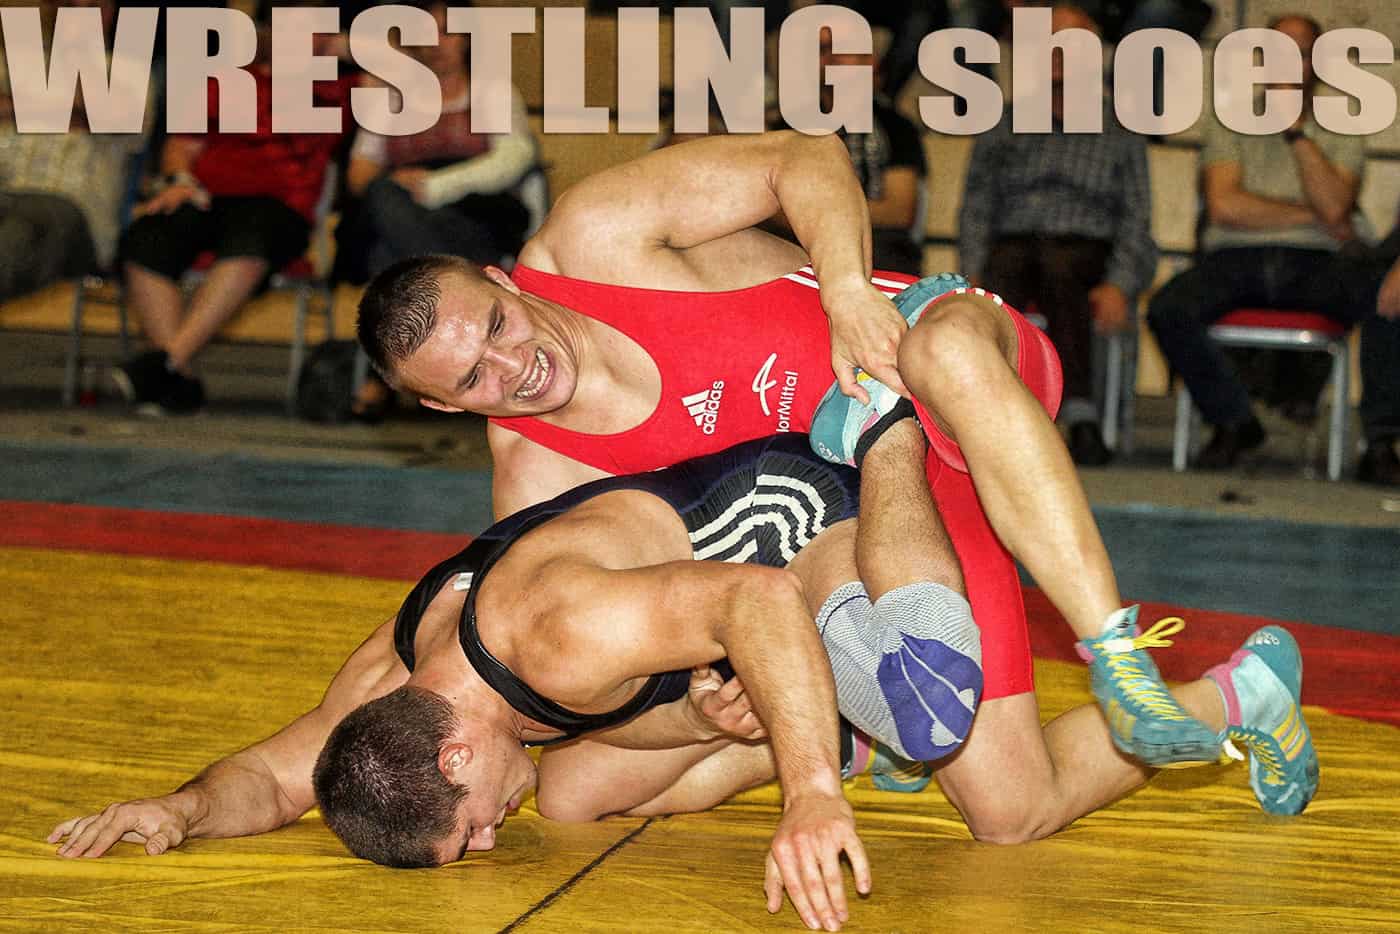 play it again sports wrestling shoes